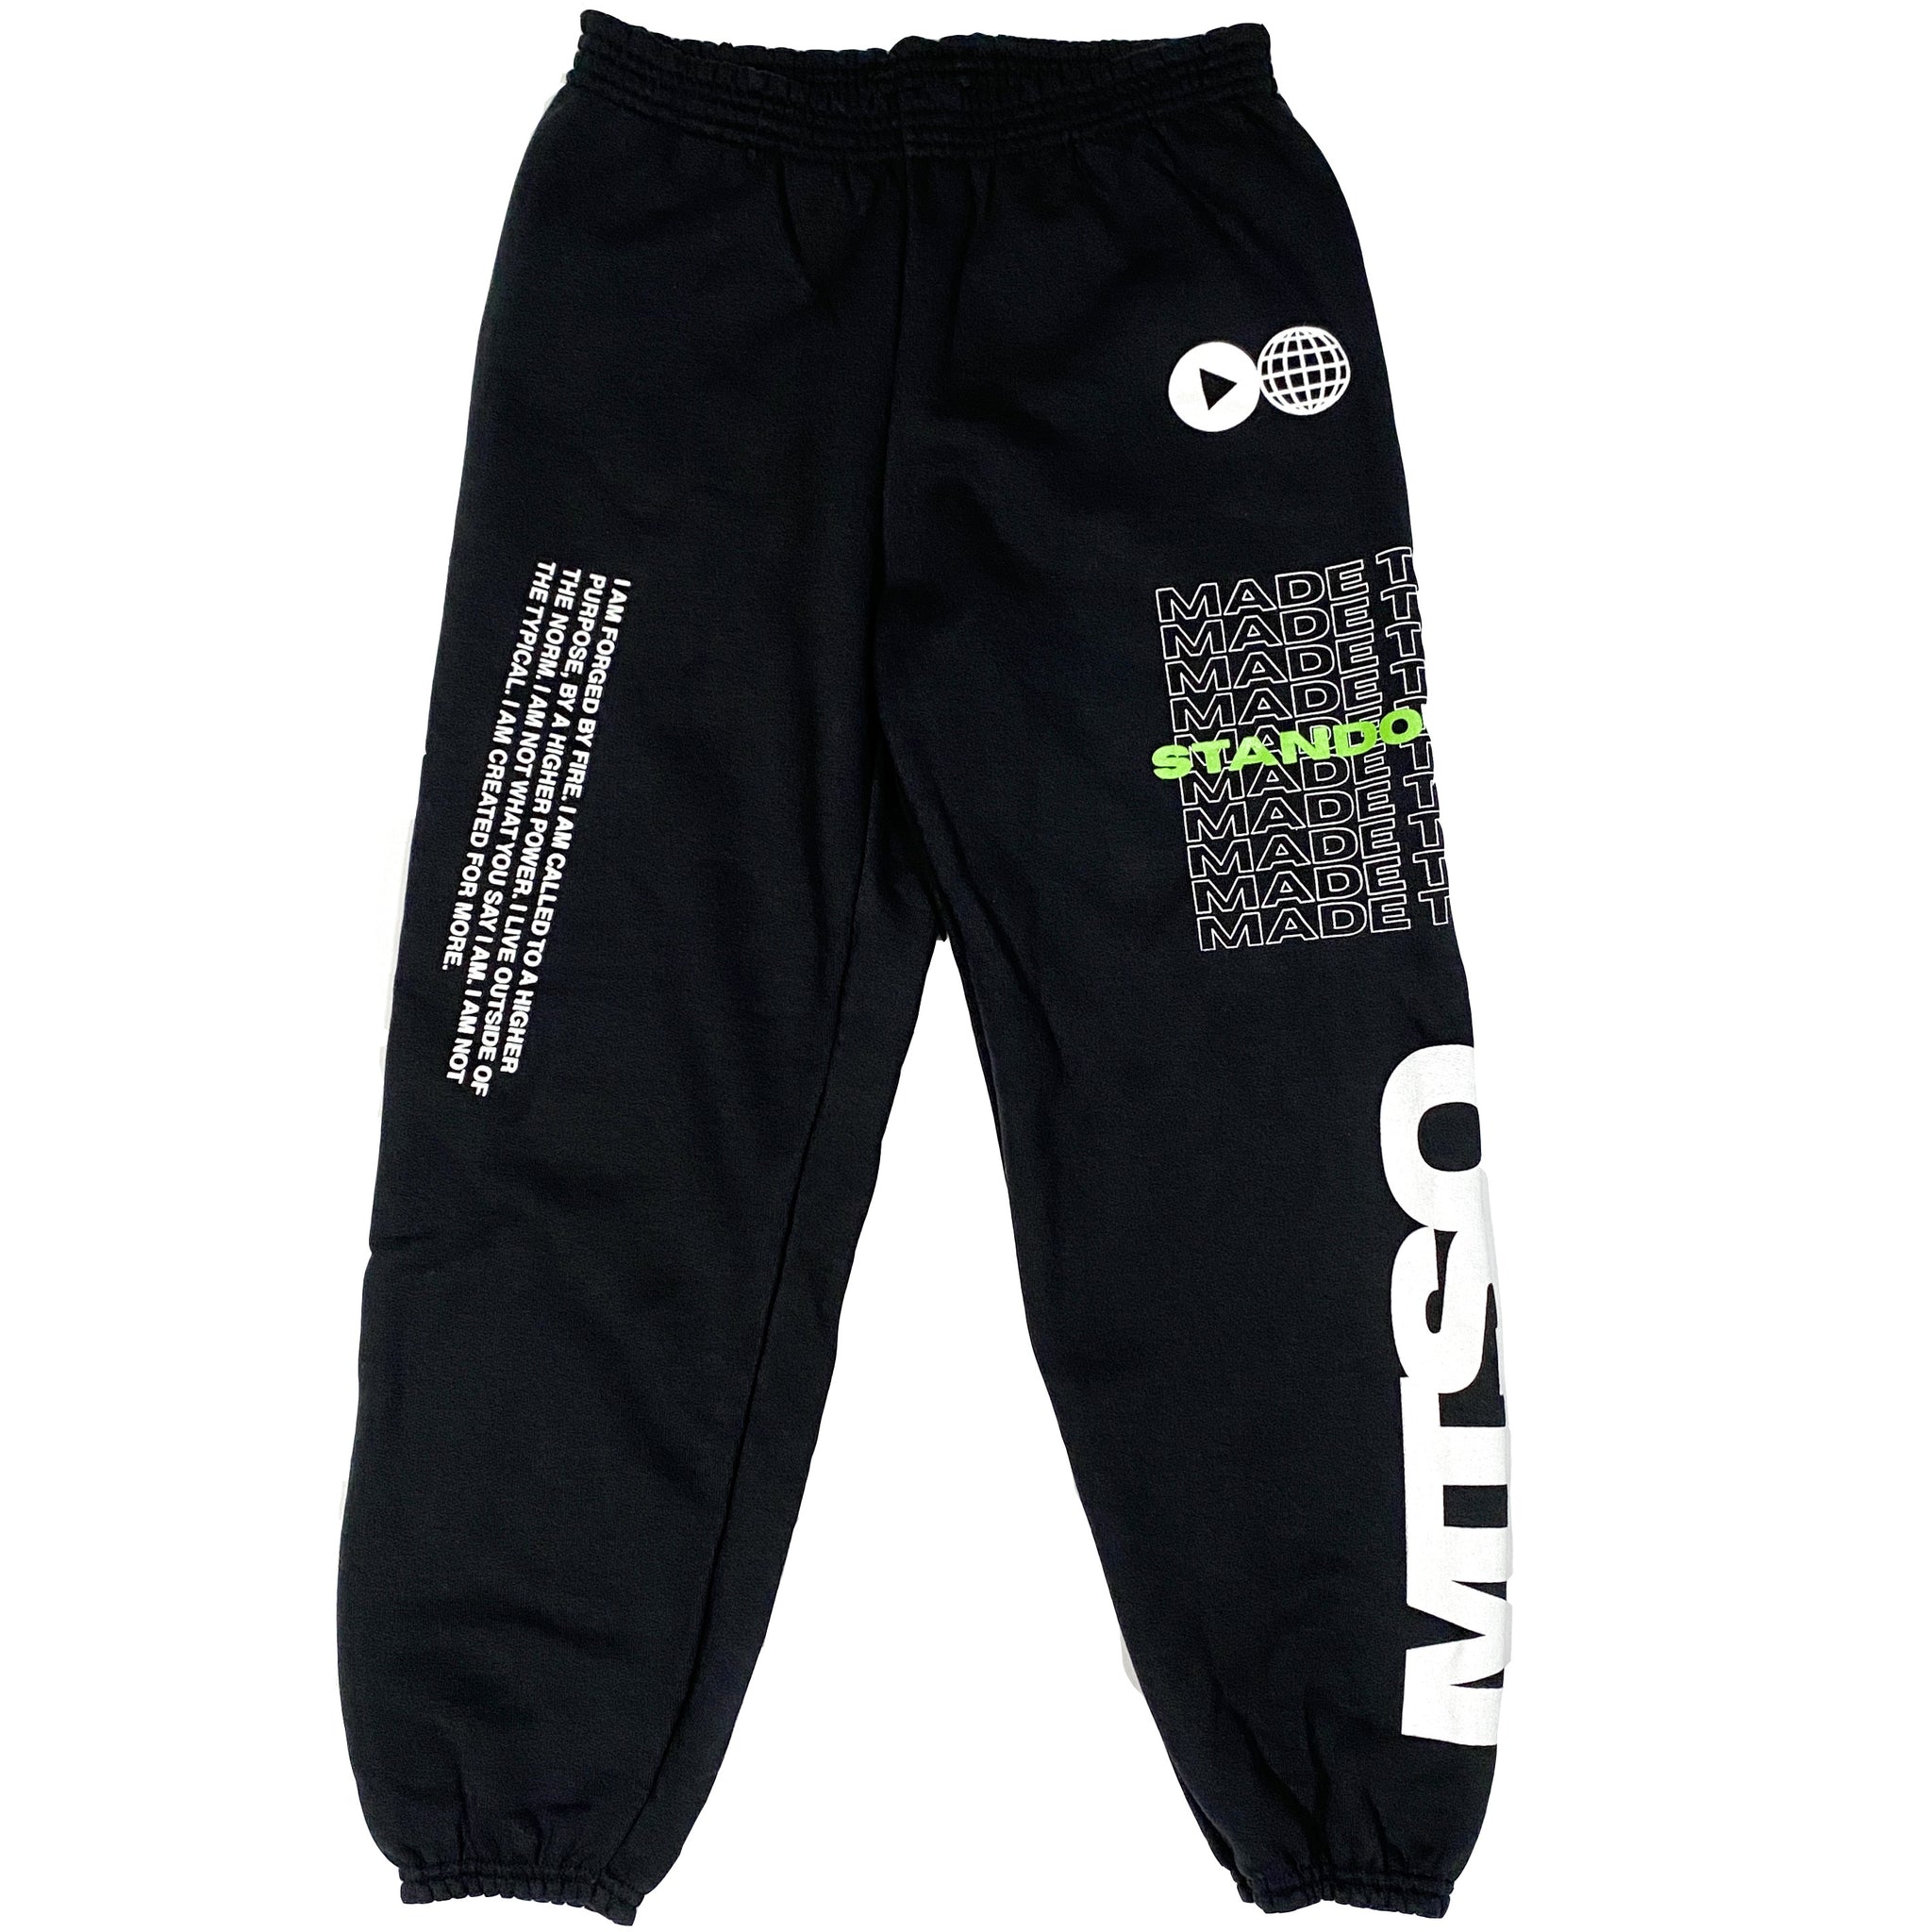 What are these sweatpants called and where to get them. I have a